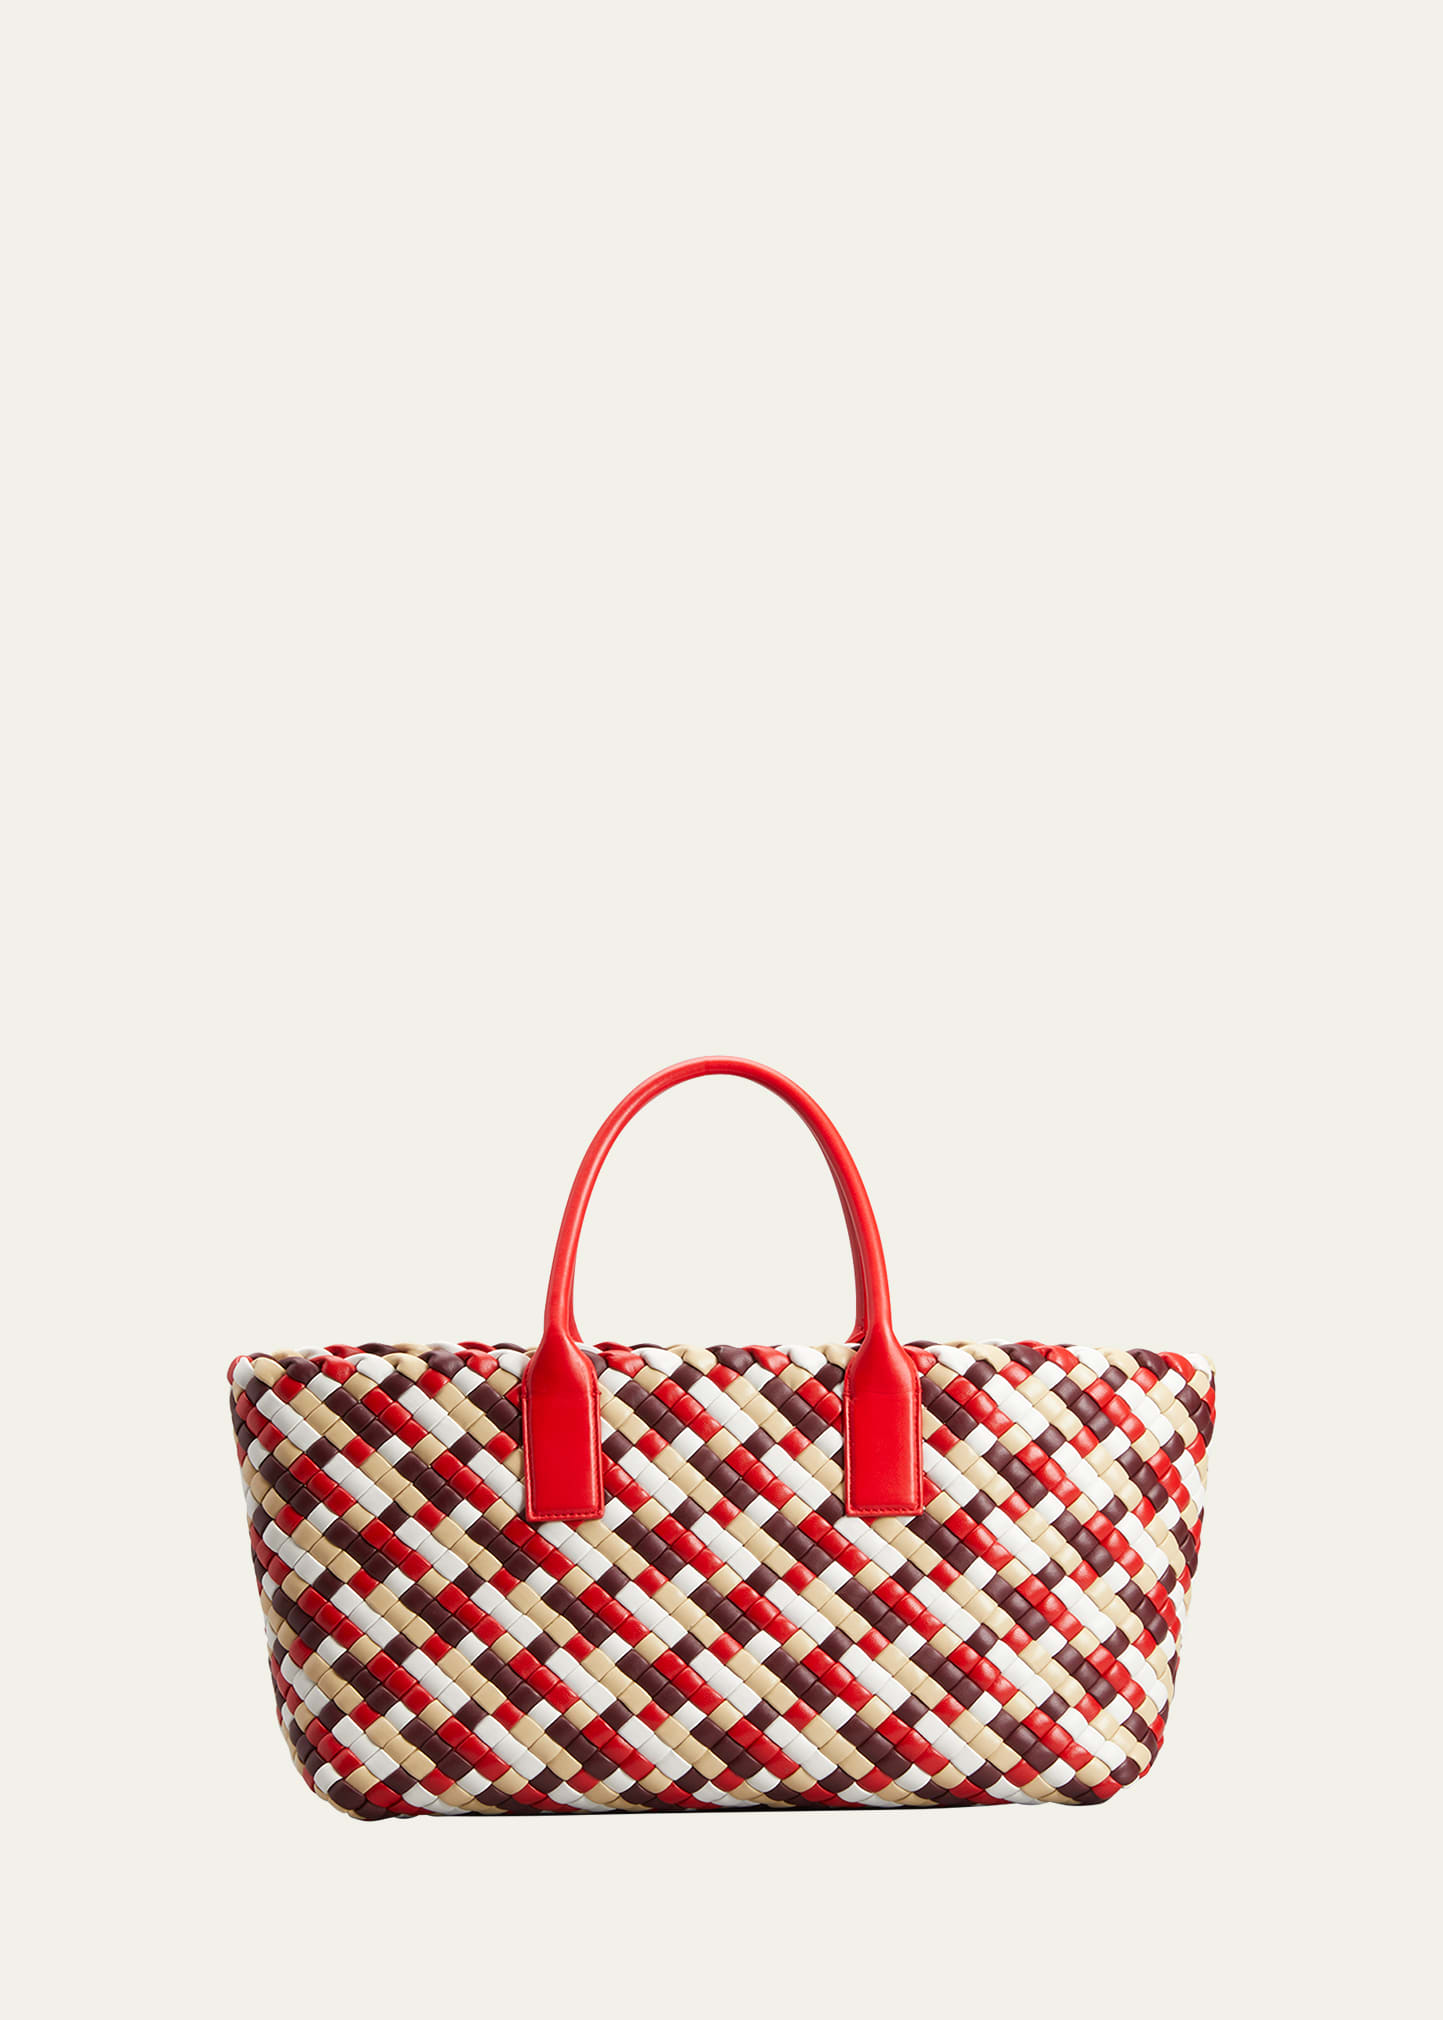 Padded Intreccio East-West Tote Bag